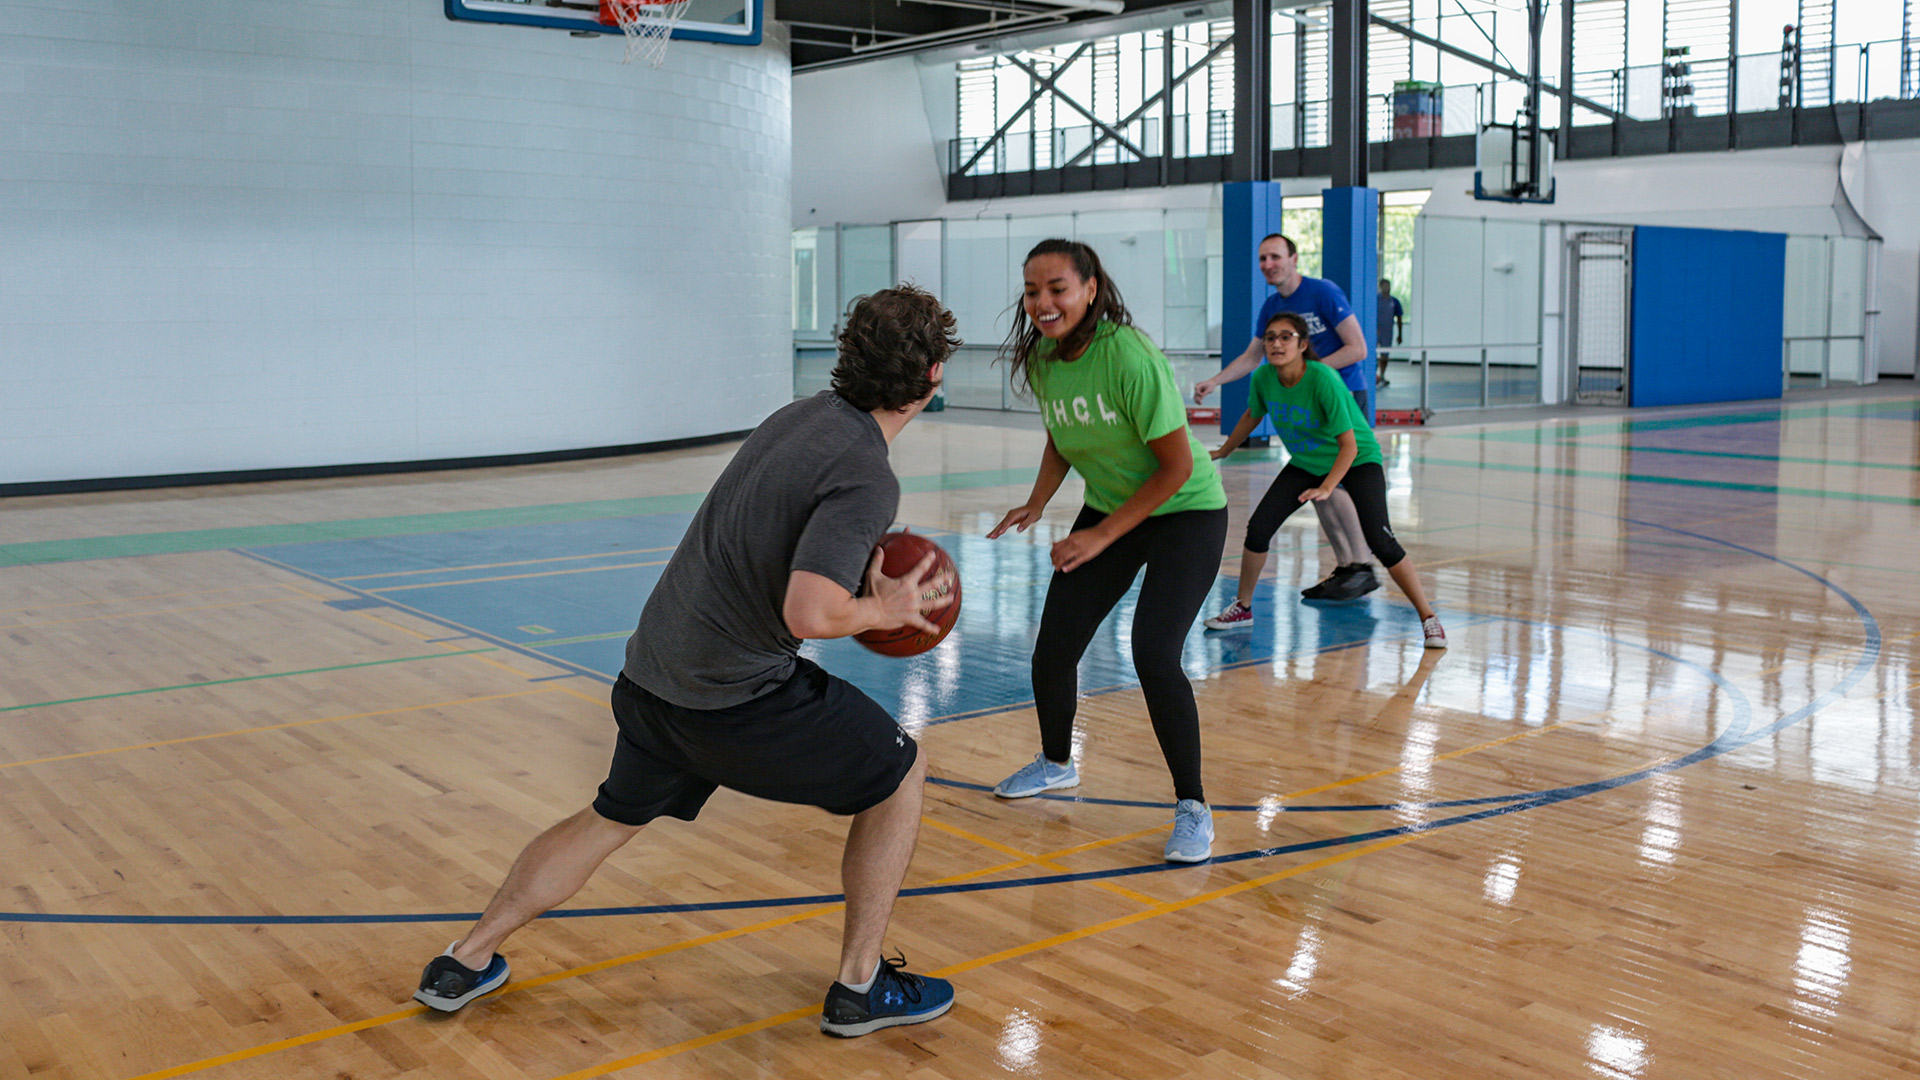 Students playing basketball on the indoor athletic courts